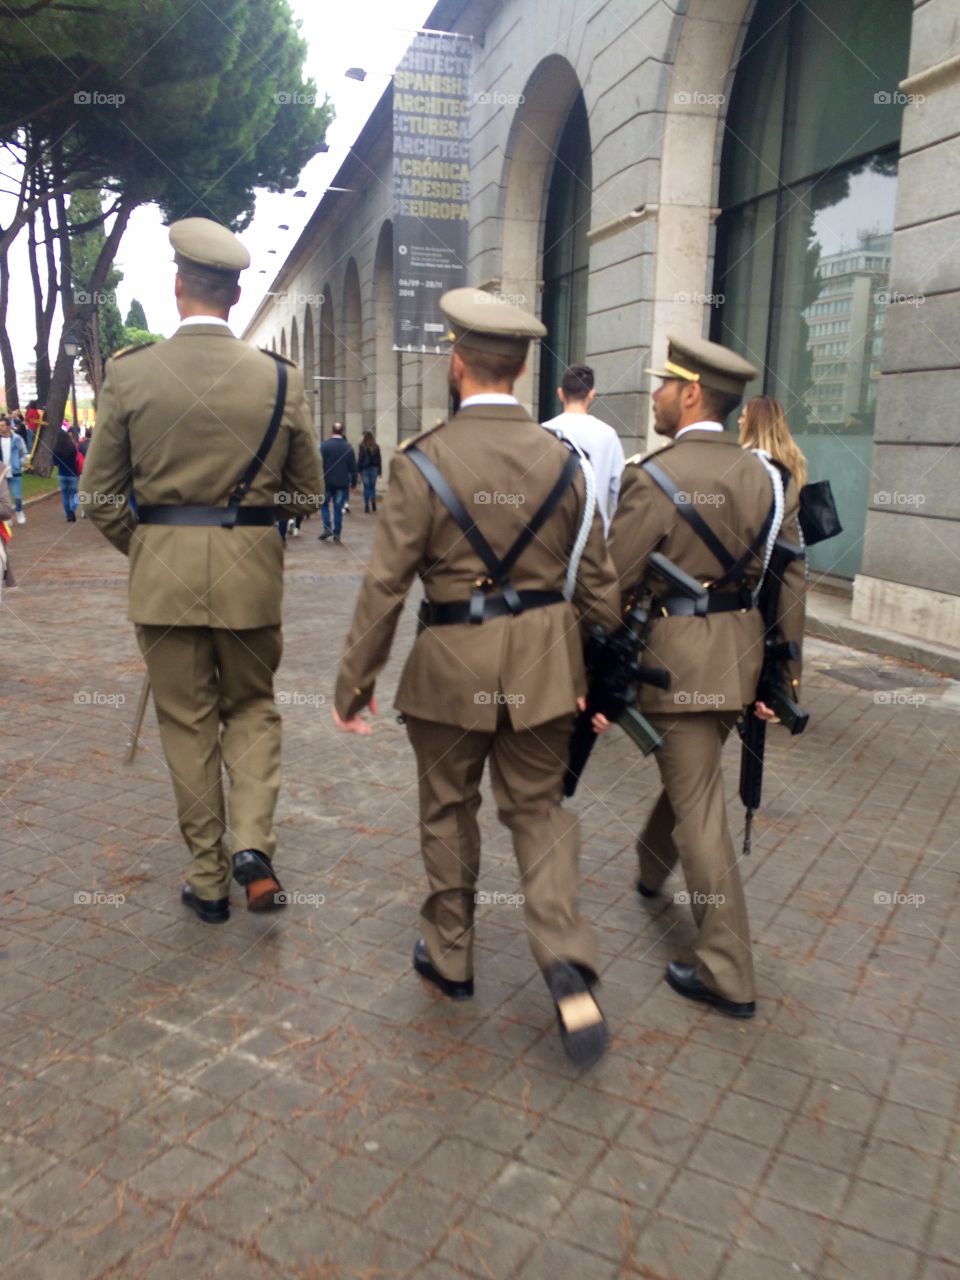 Three Spanish soldiers in full uniform walking down the streets of Madrid in Spain during national day celebrations 